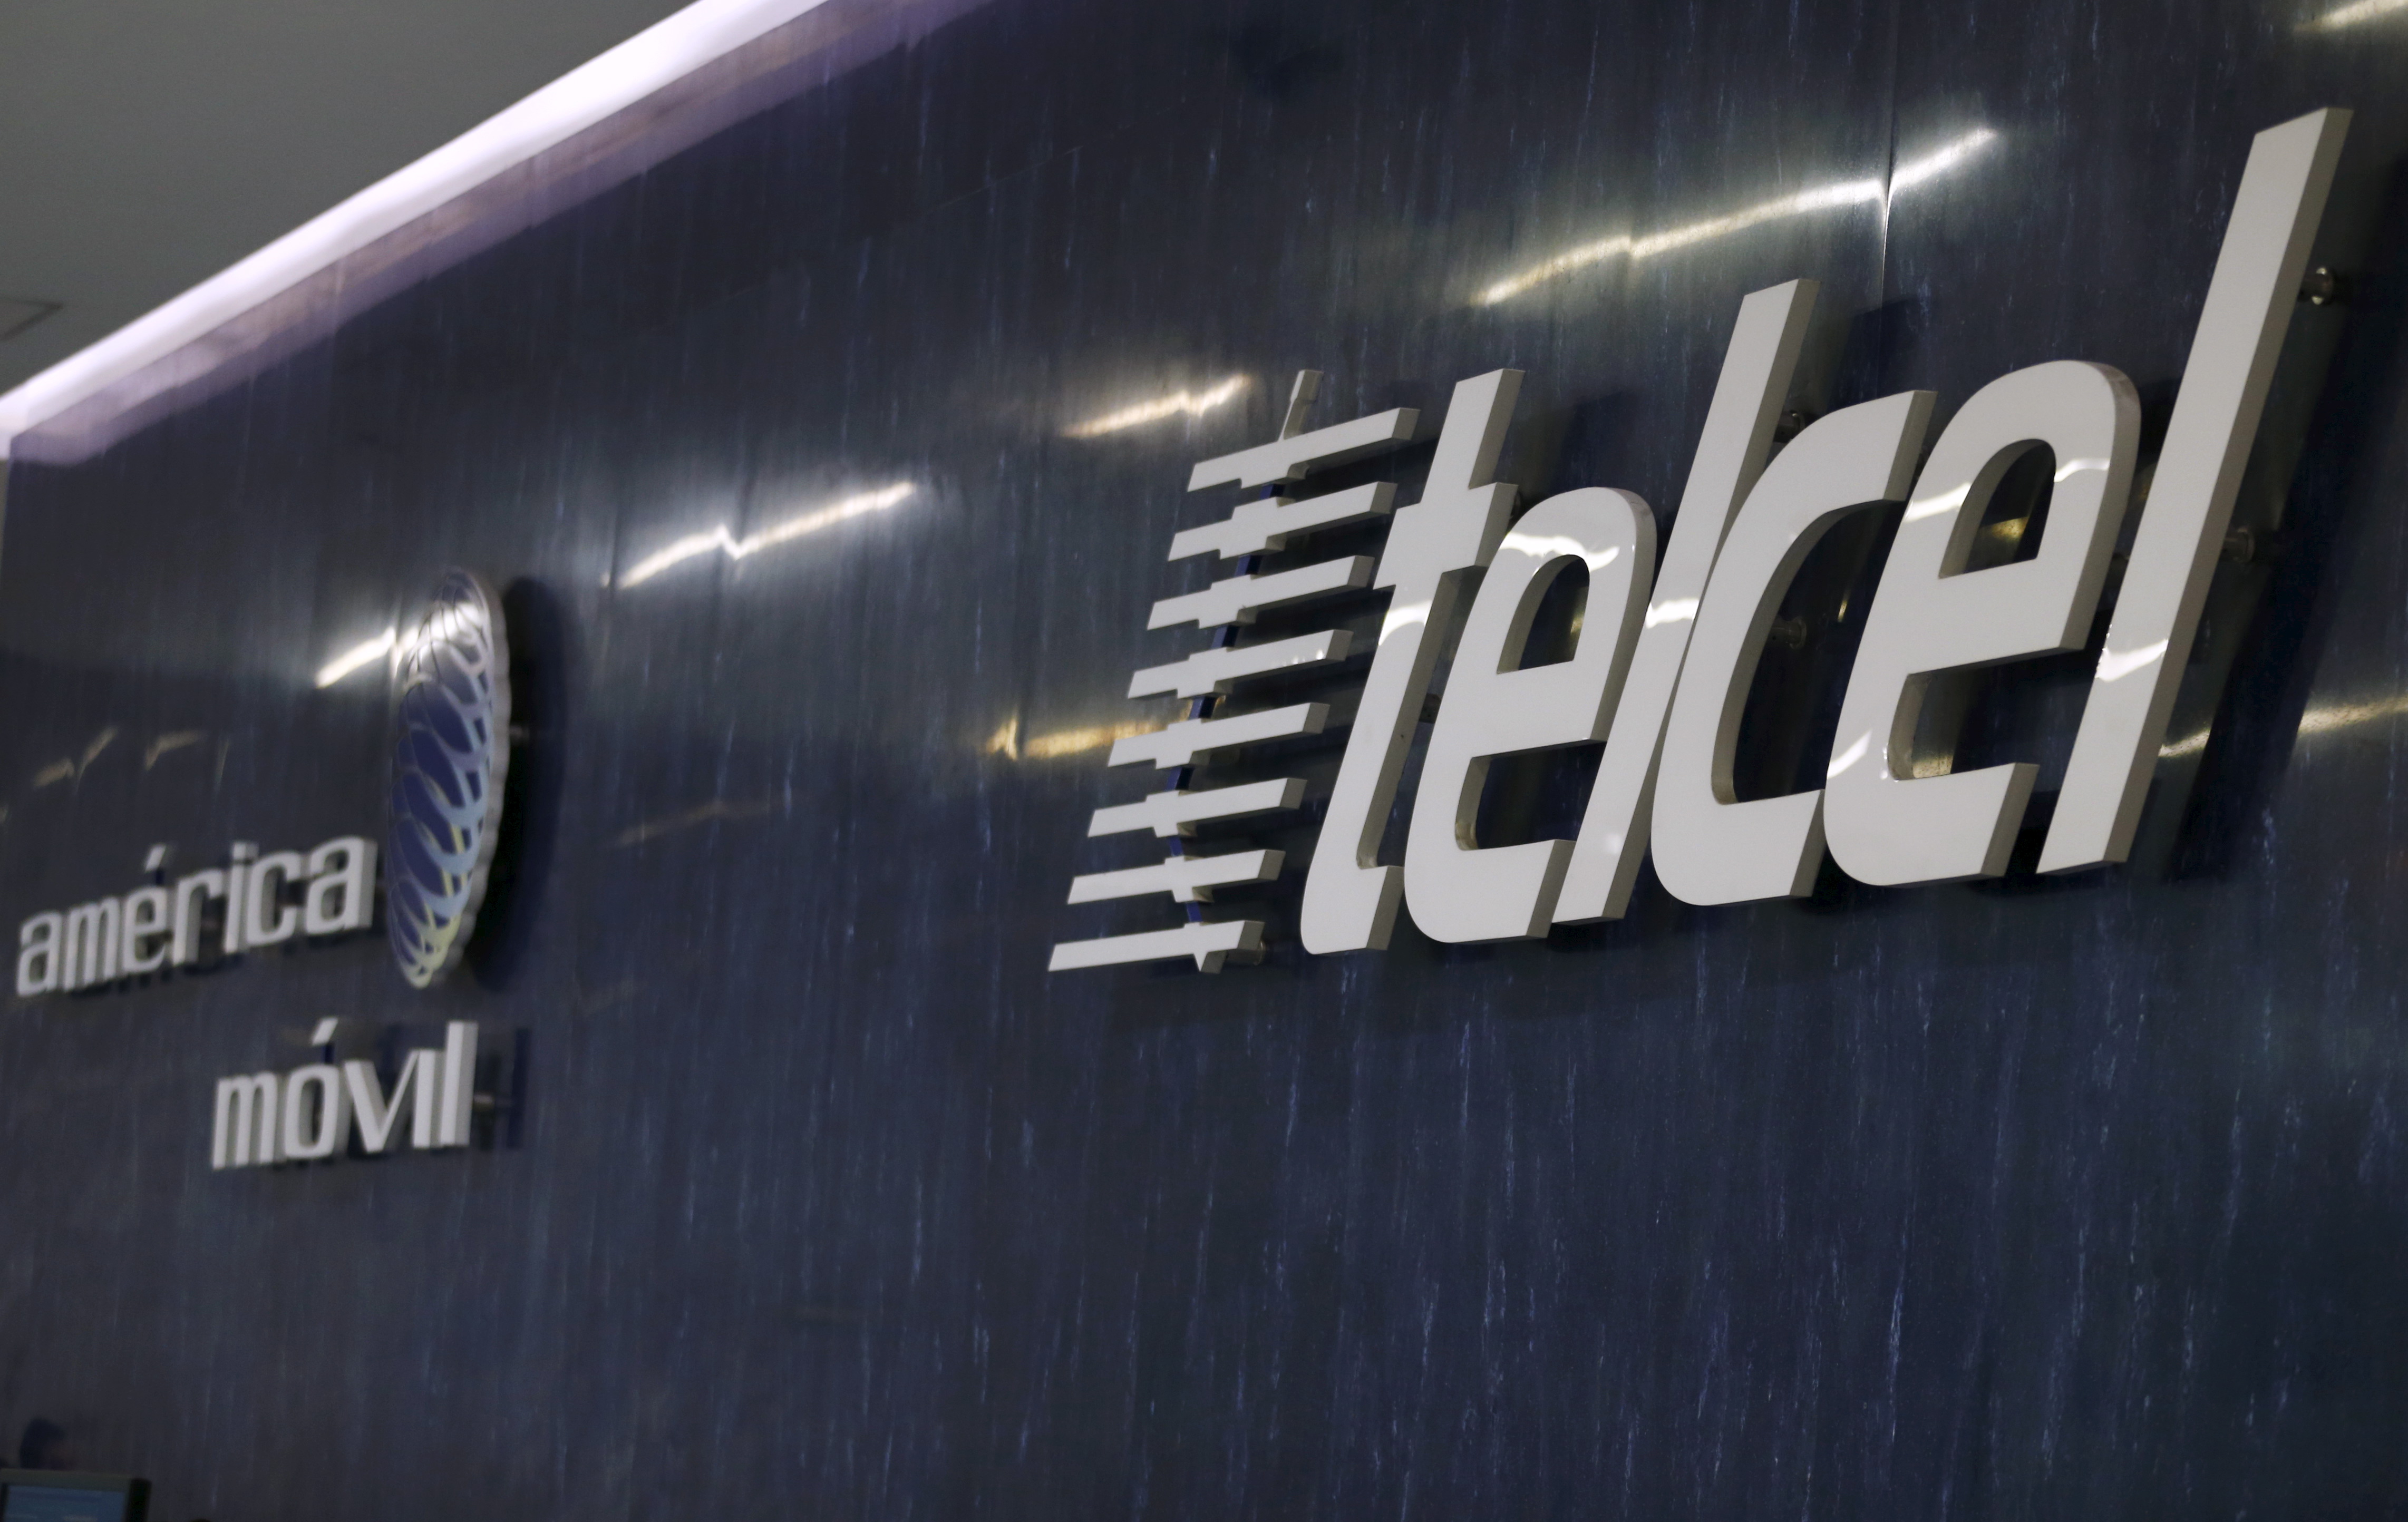 The logos of America Movil and its commercial brand Telcel are seen at the reception area in the company's offices in Mexico City